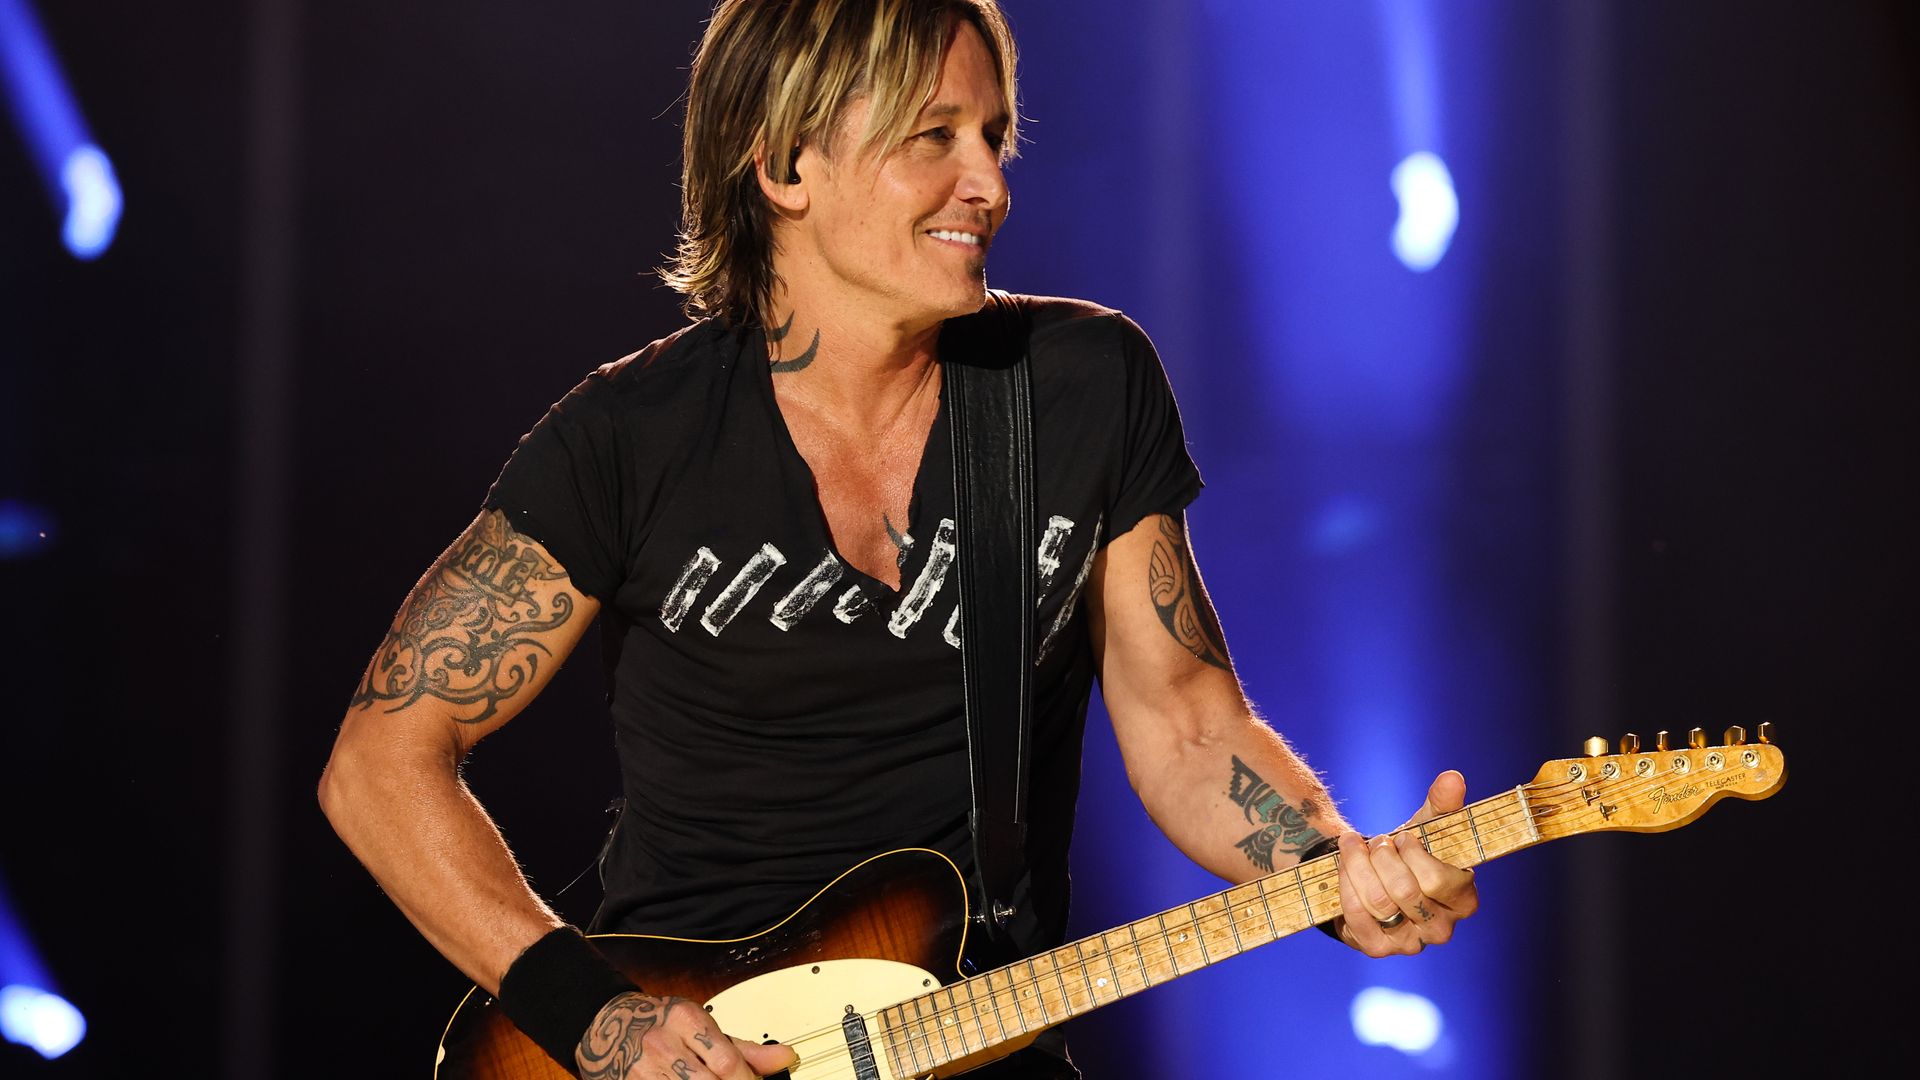 Keith Urban performing on stage with a guitar, looking to the right